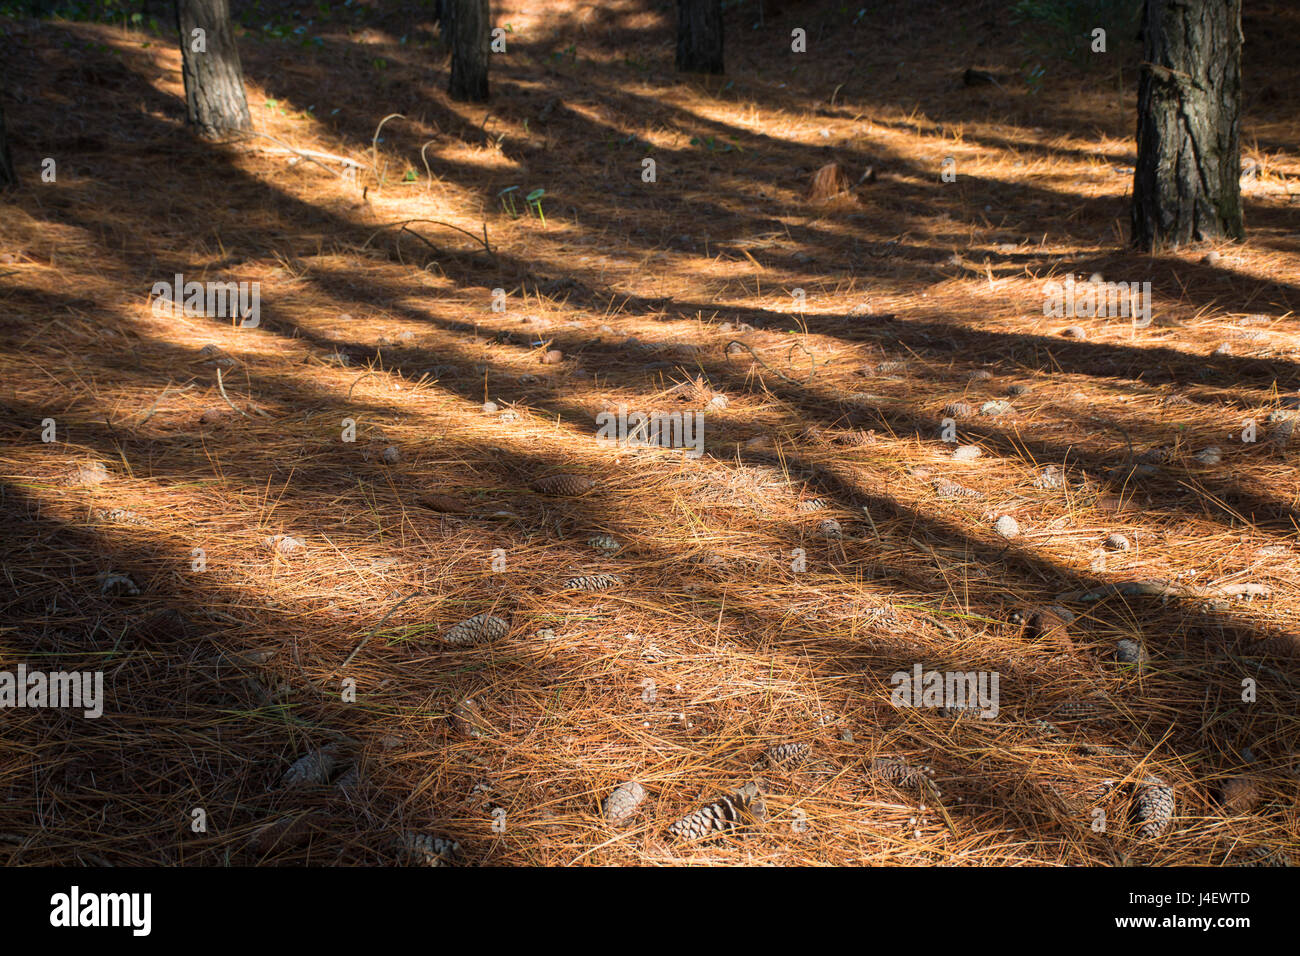 Pine cones and pine needles on the ground in a forest Stock Photo